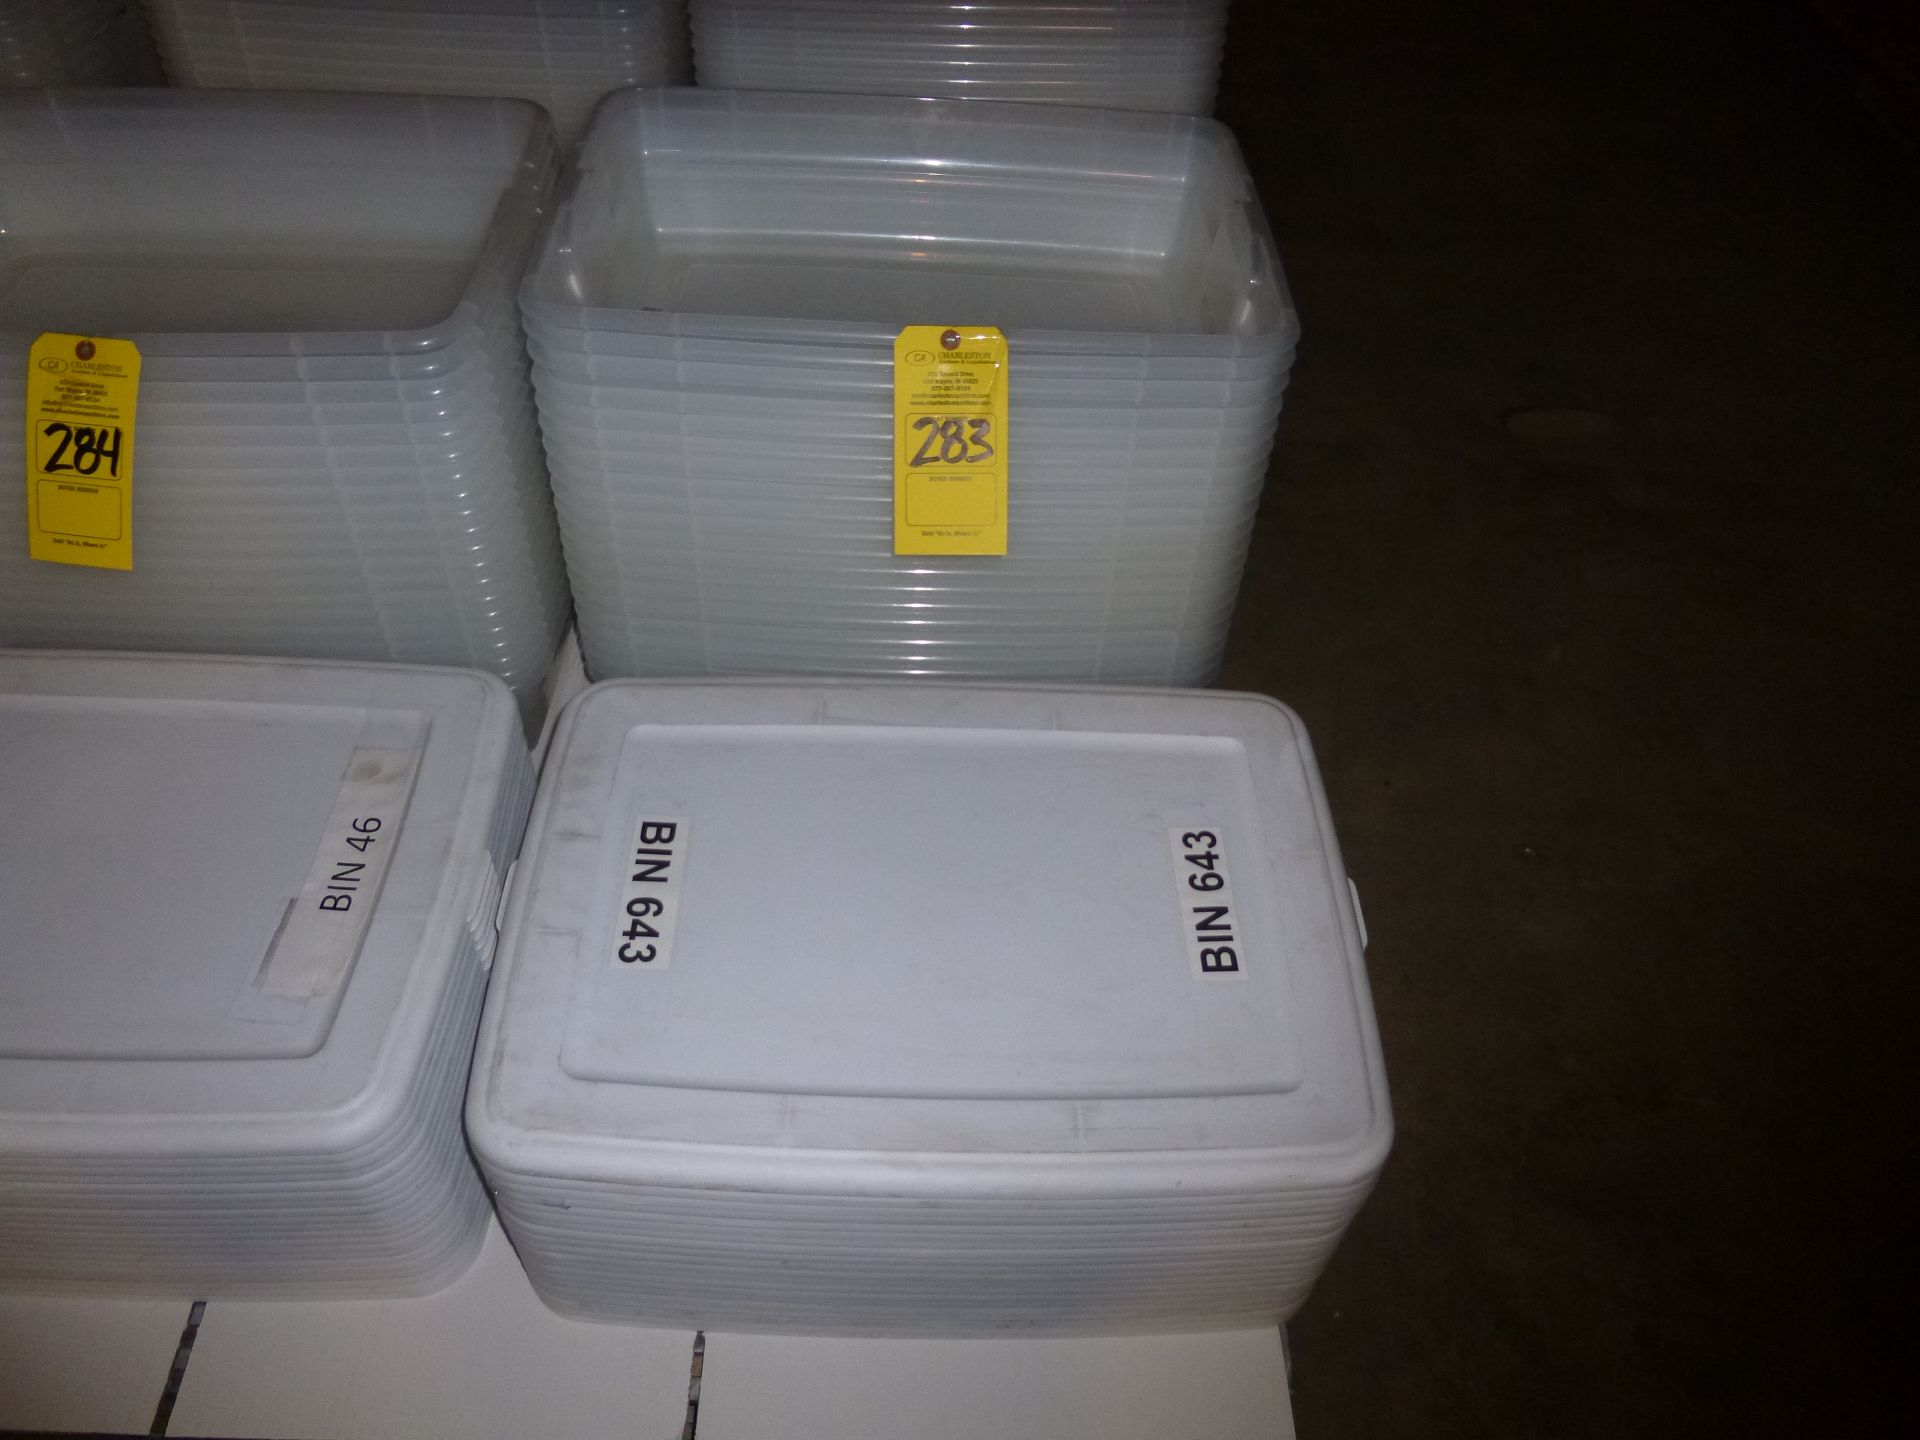 Qty 20 - storage bins 28 quart size with lids. Shipping can be prepared for either ground package or